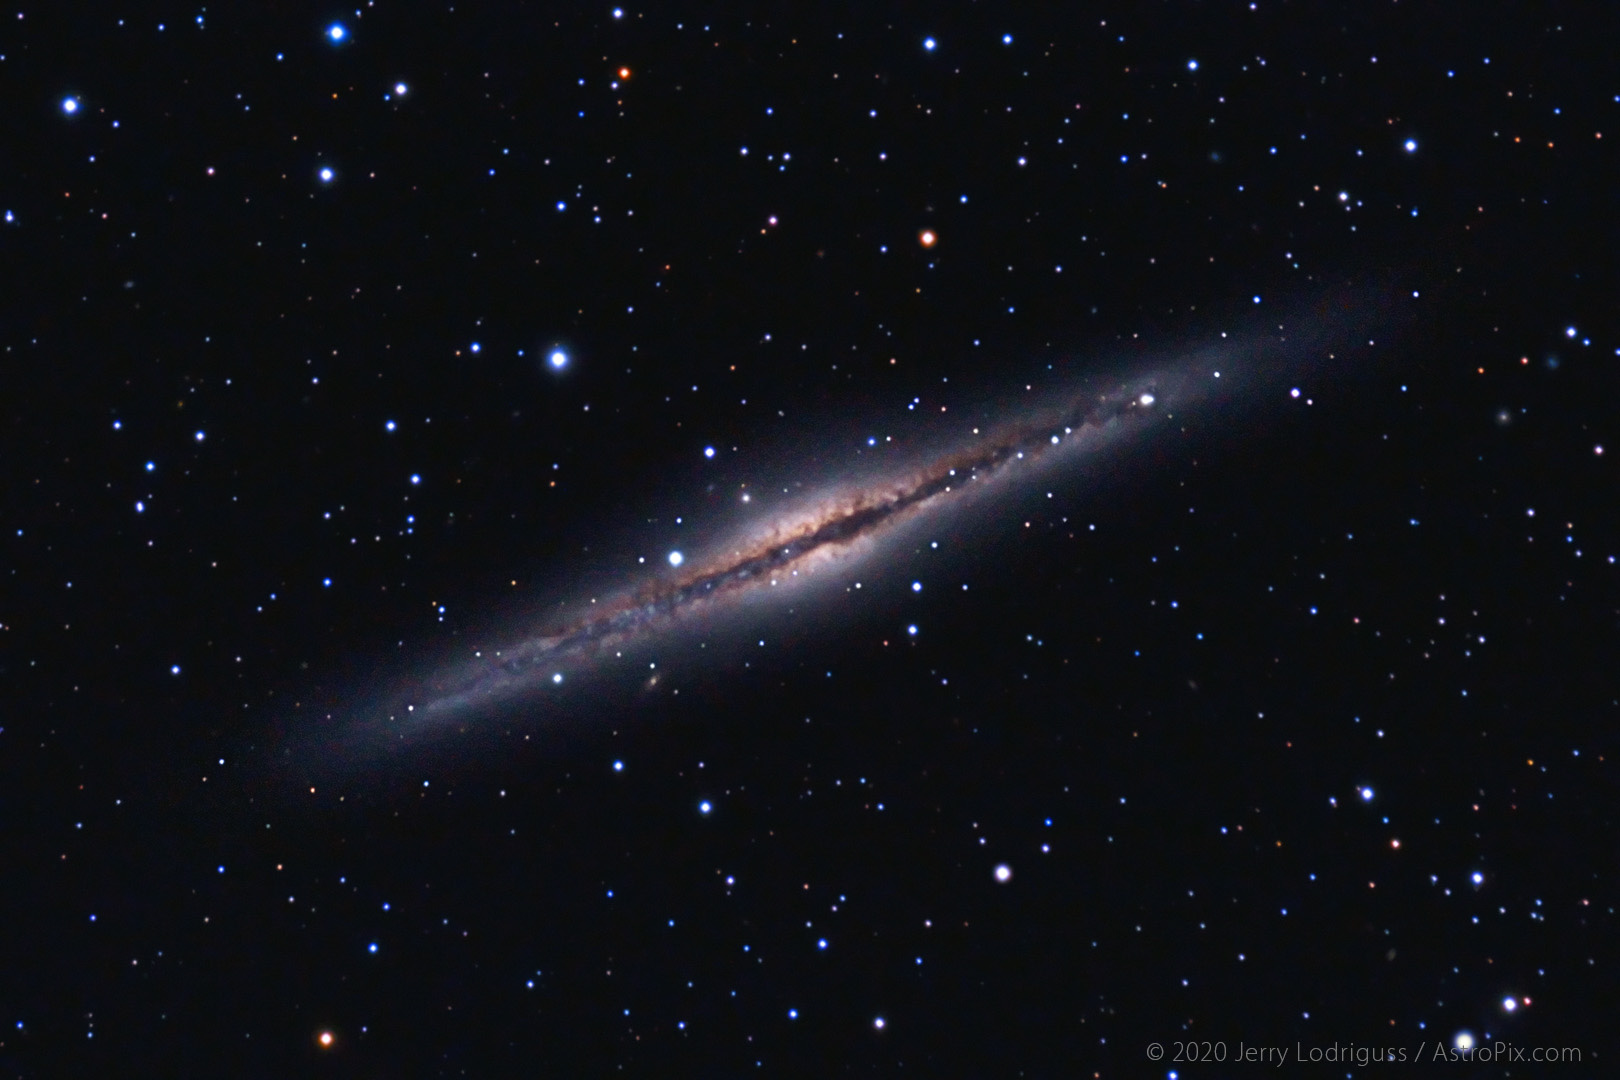 Galaxy NGC 891 is an edge-on spiral galaxy bisected by a dark lane. It is located in the constellation of Andromeda.